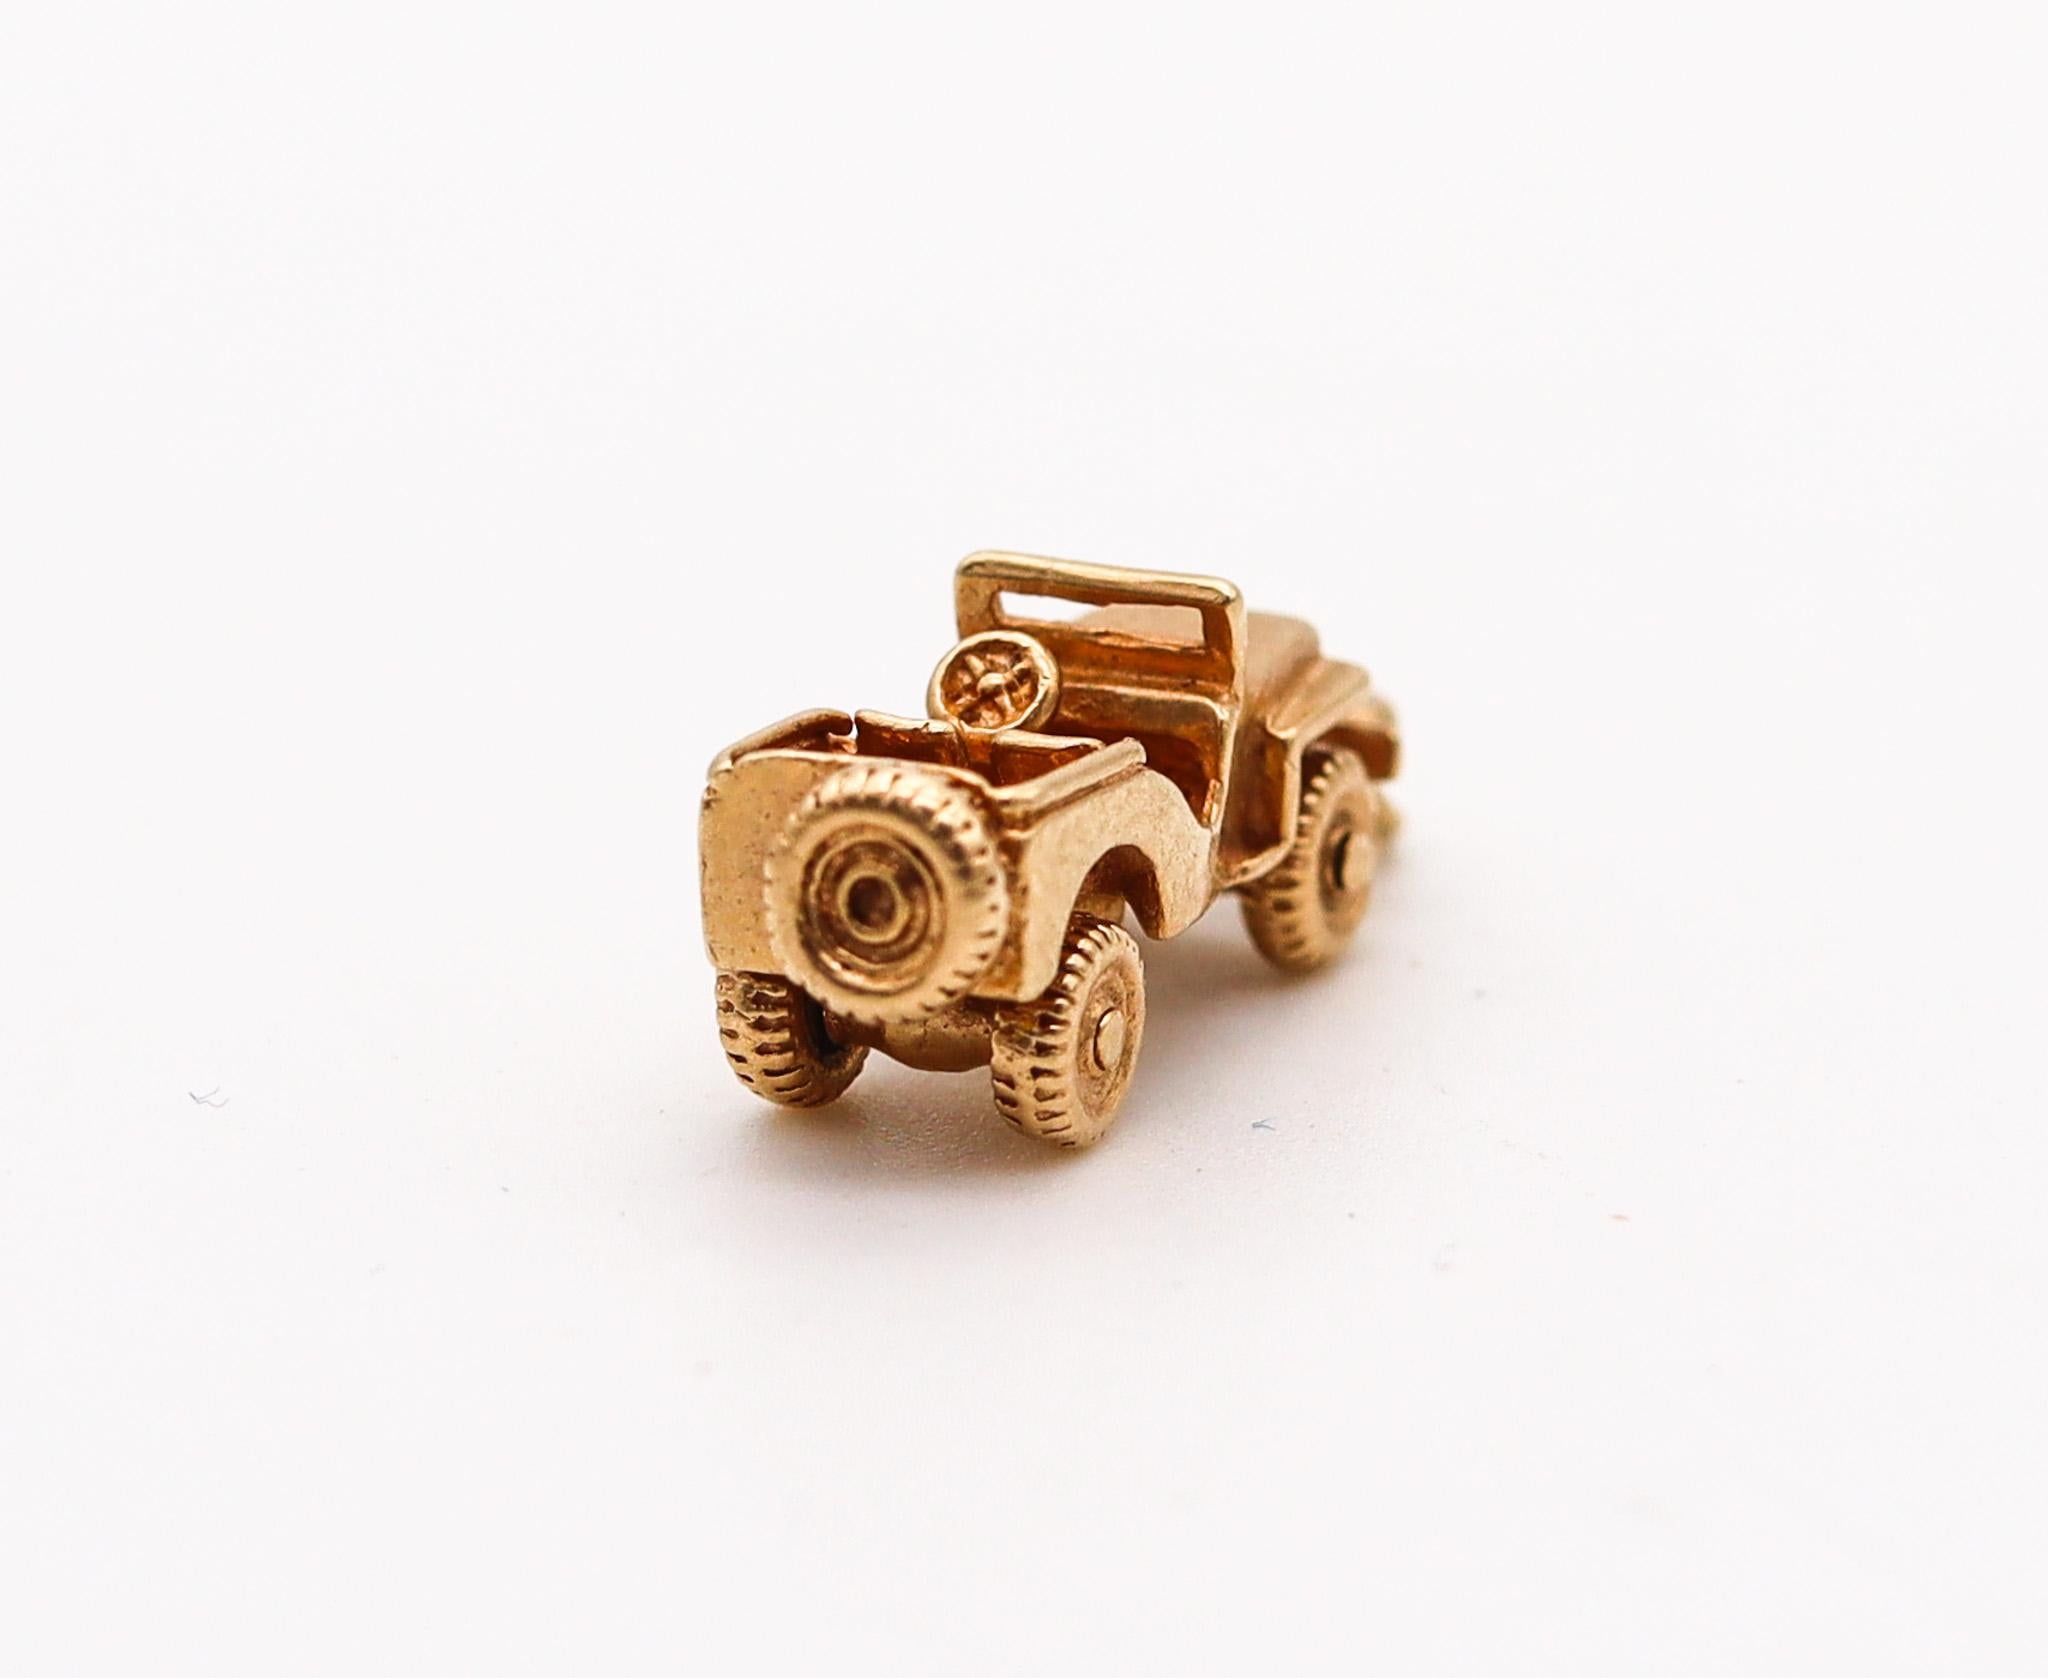 Retro 1940 Miniature JEEP CAR Pendant Charm in Solid 14Kt Yellow Gold In Excellent Condition For Sale In Miami, FL